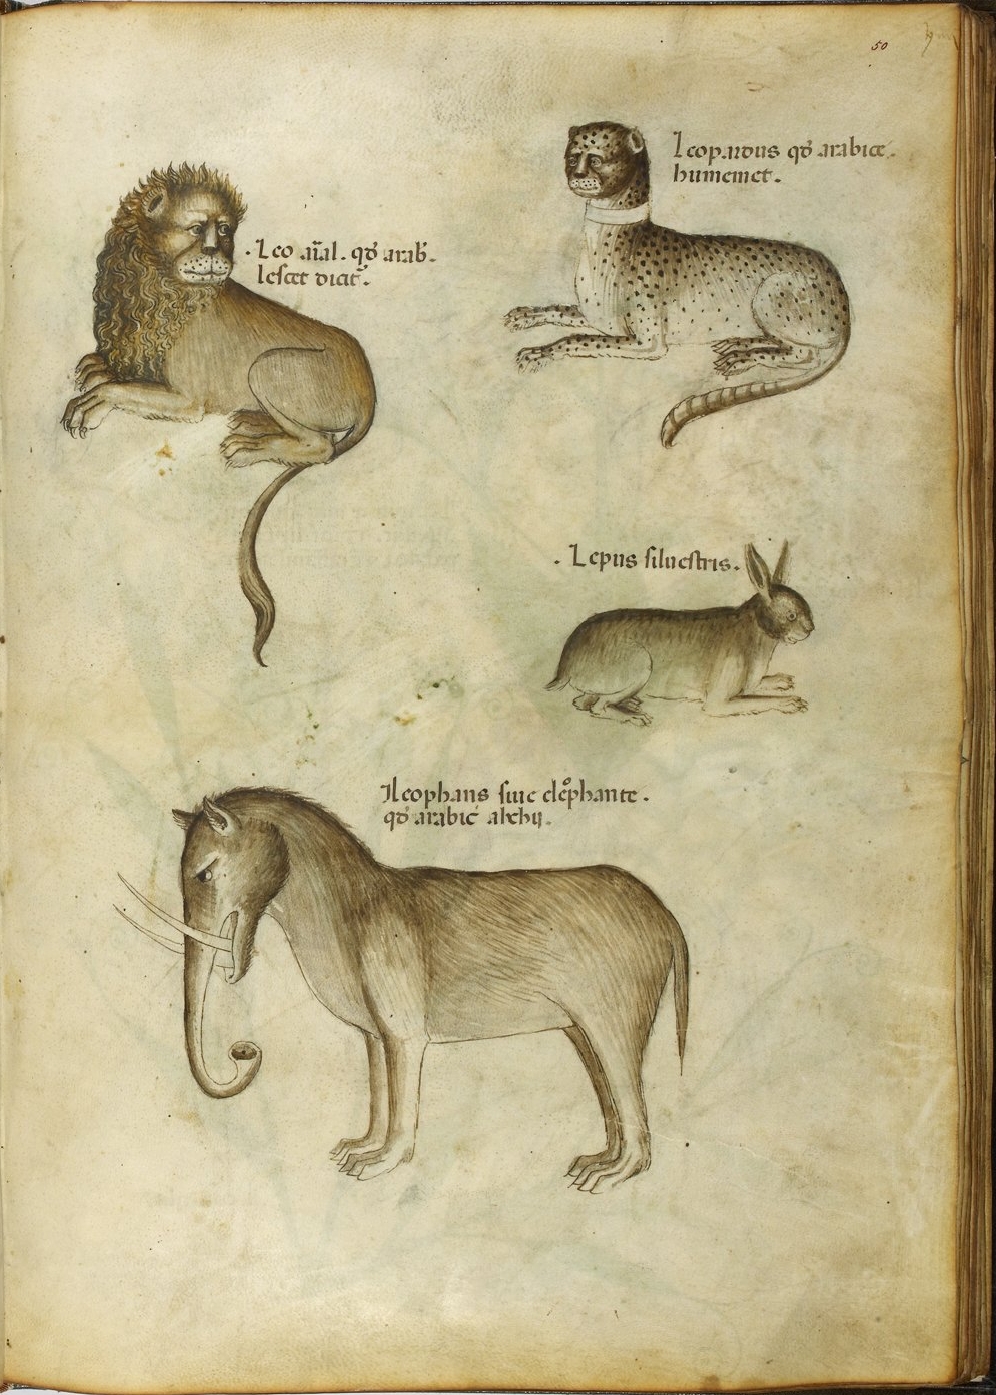 an open book showing various animals and their names